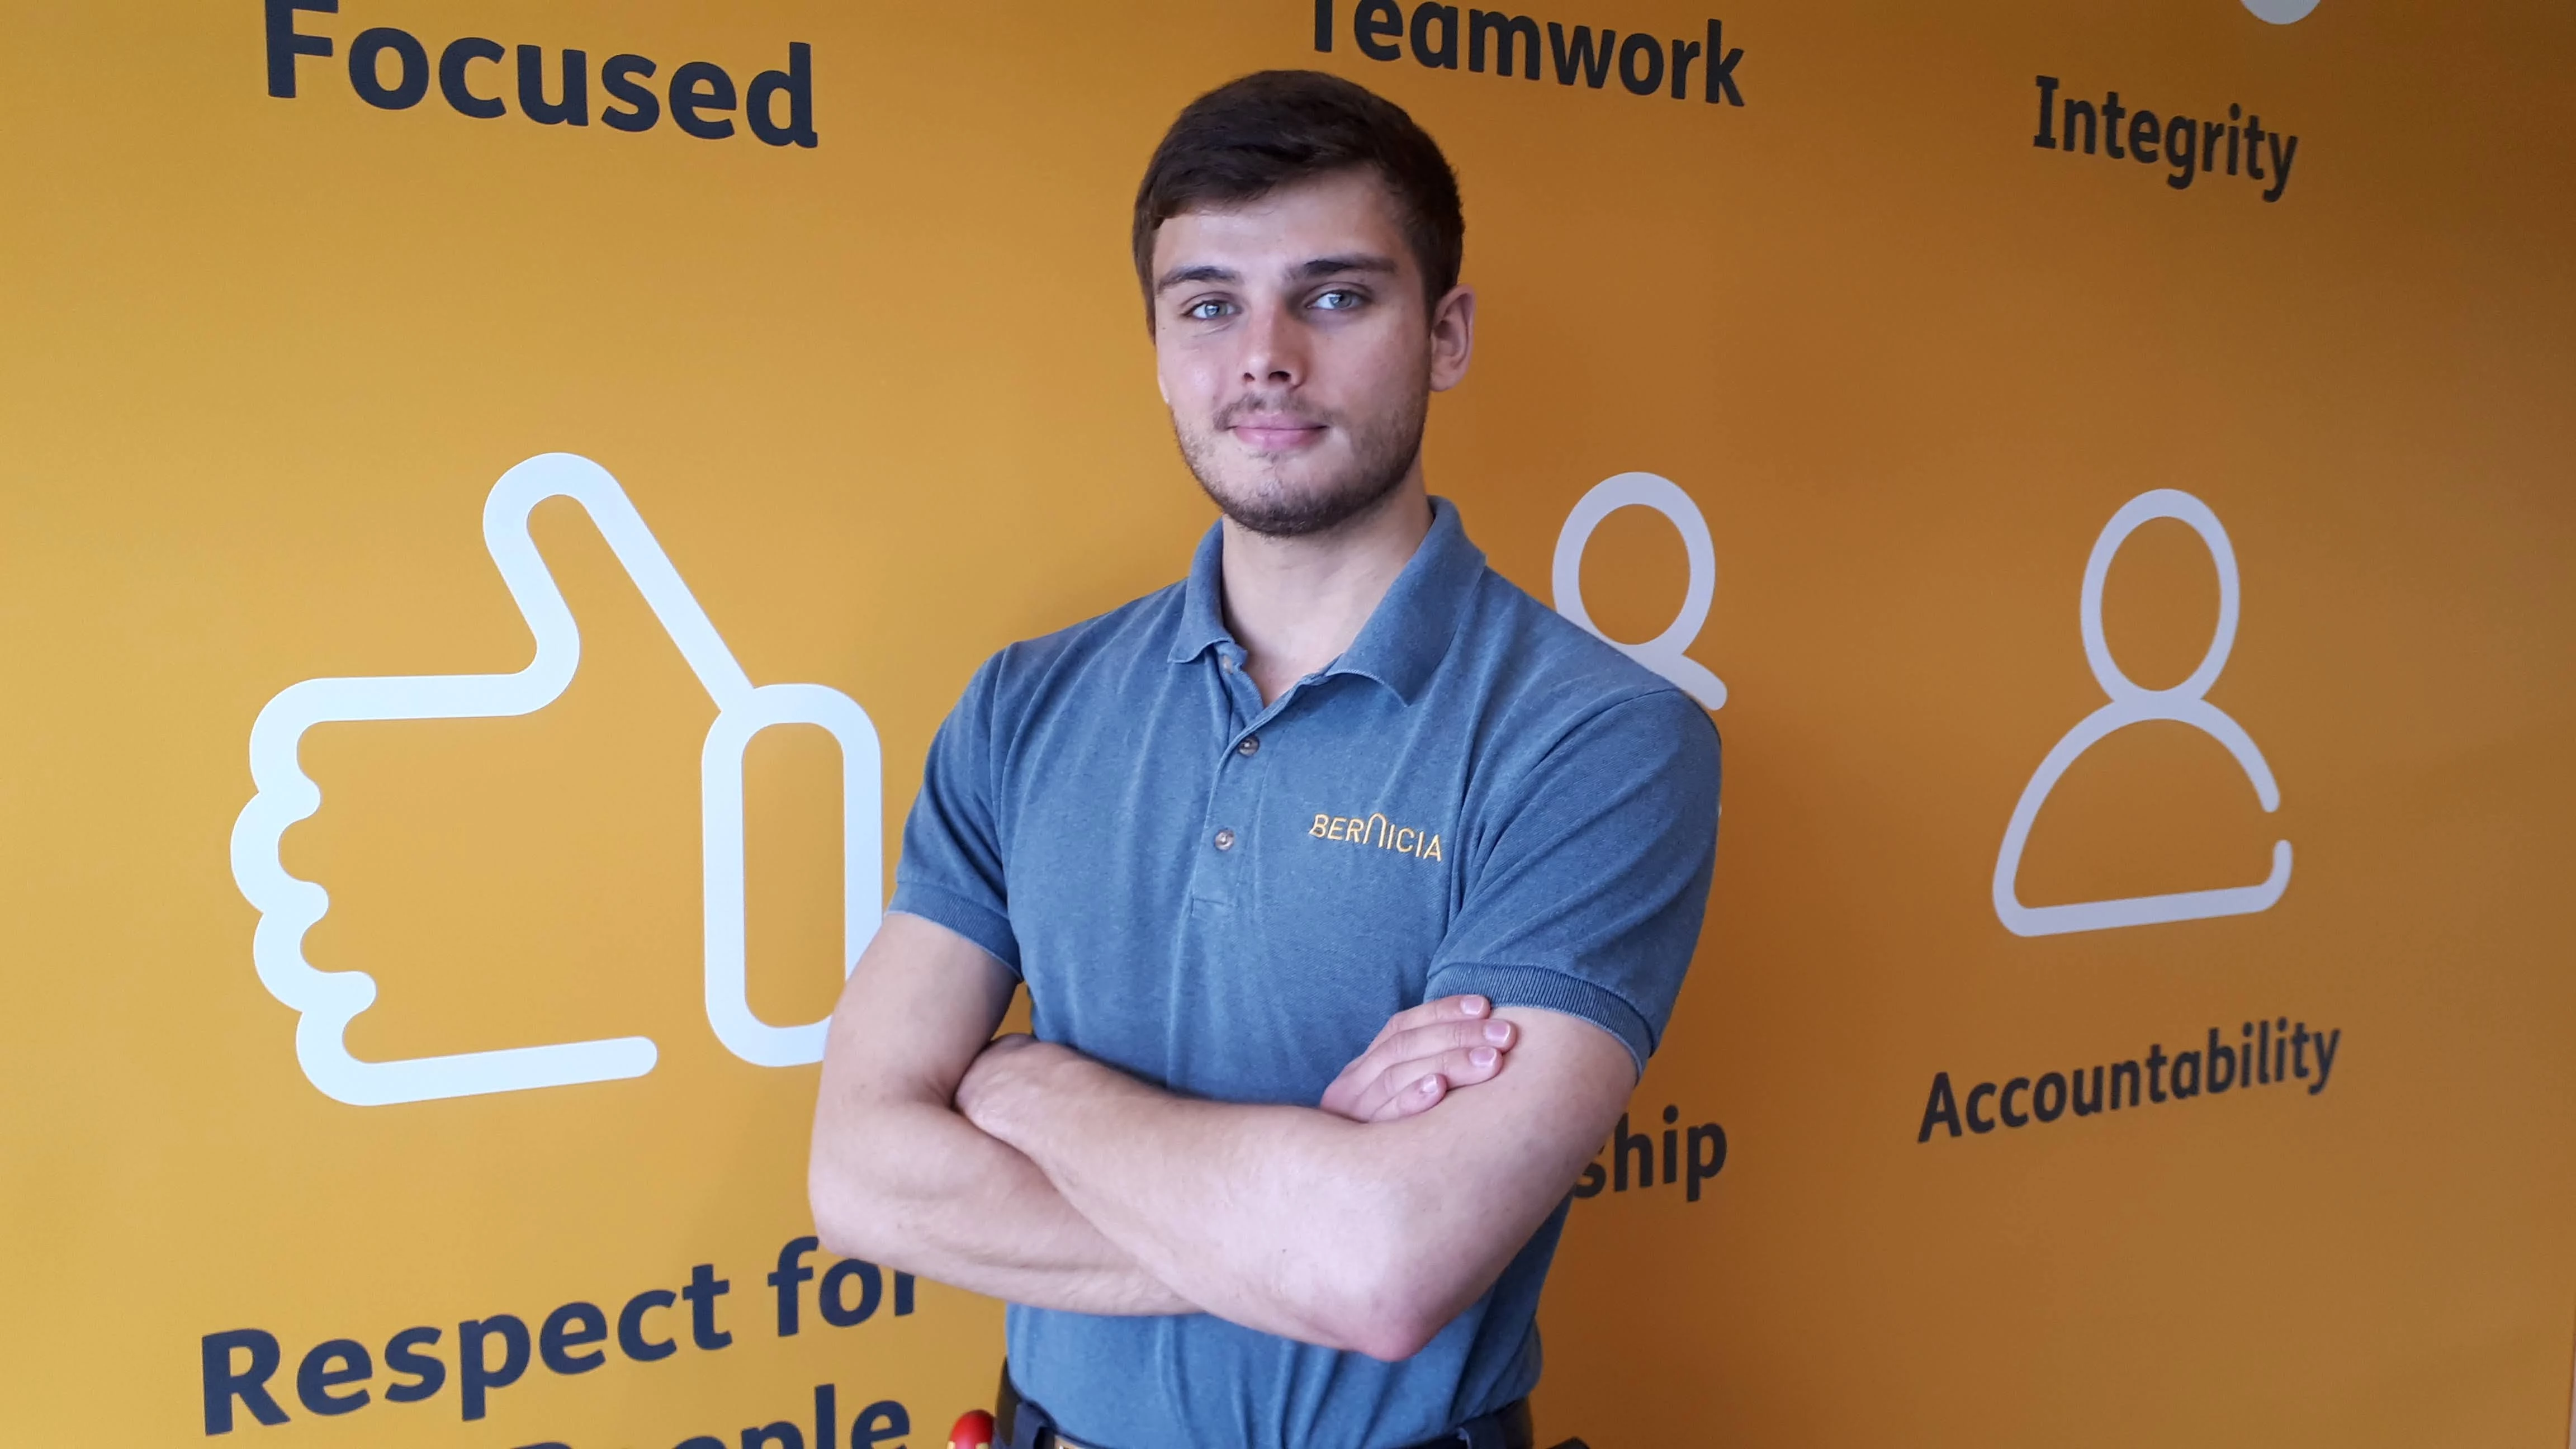 Lewis Yates is a former apprentice and one of many successes from Bernicia’s apprenticeship programme. He is now a fully qualified electrician employed at the housing association.